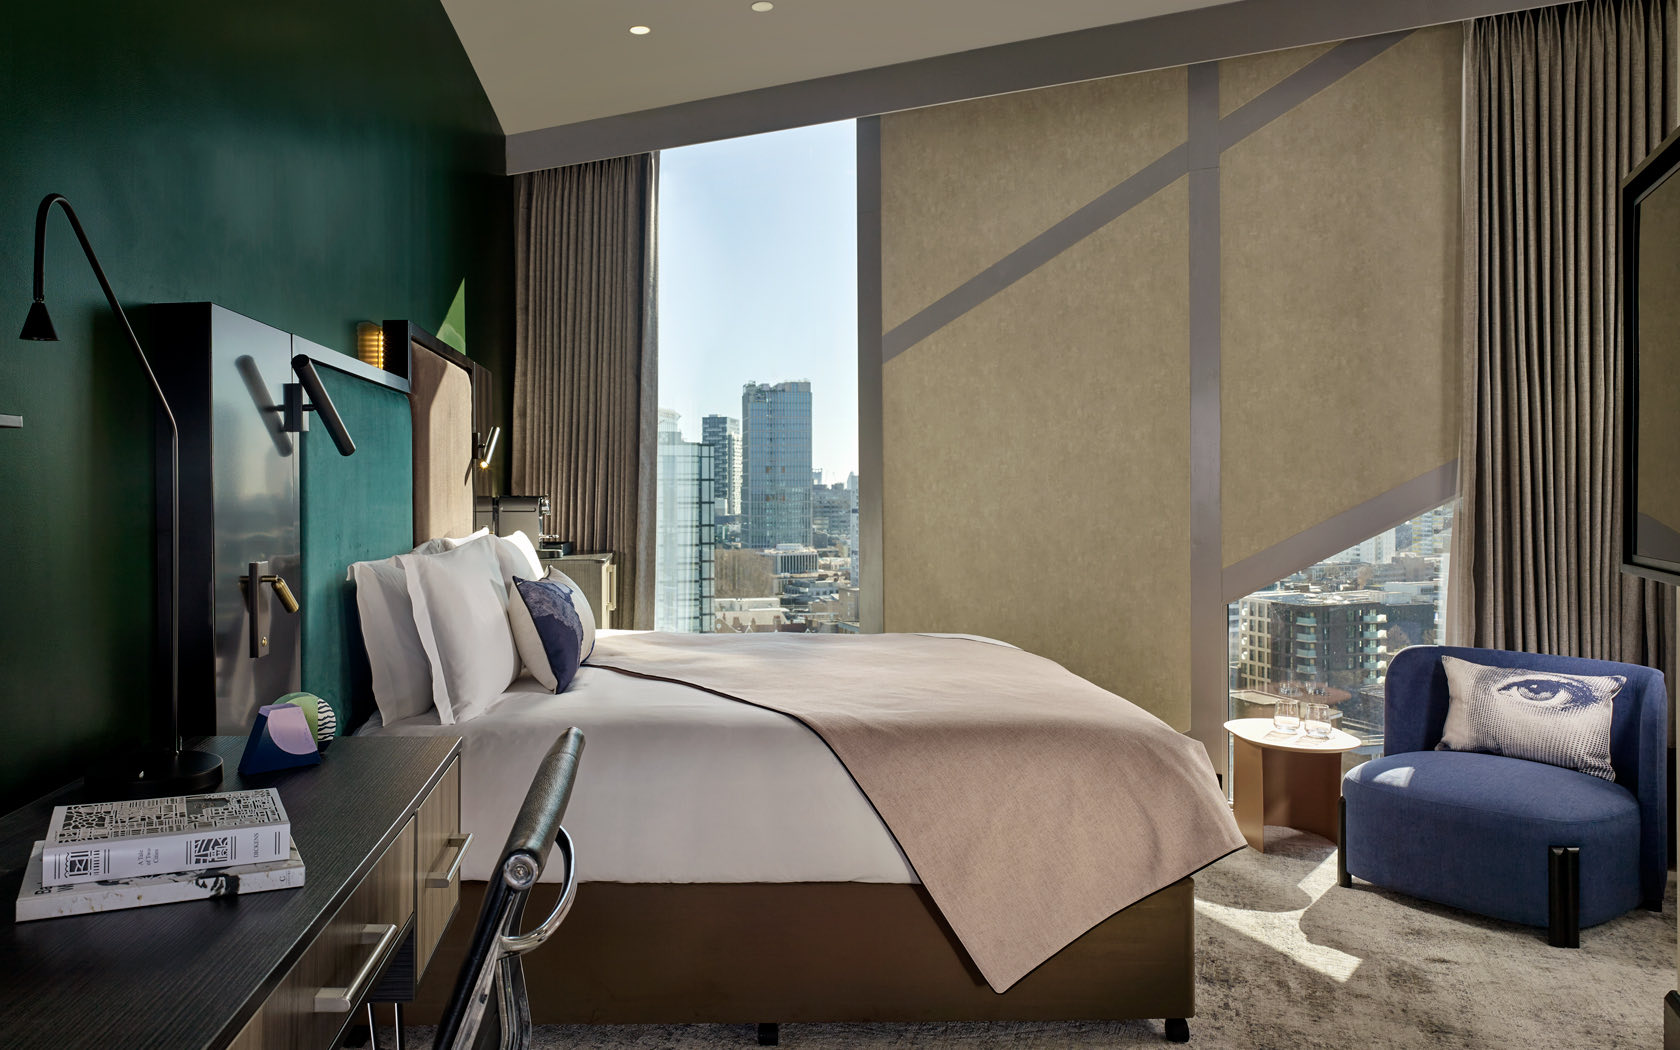 king bed in large spacious room with window facing city